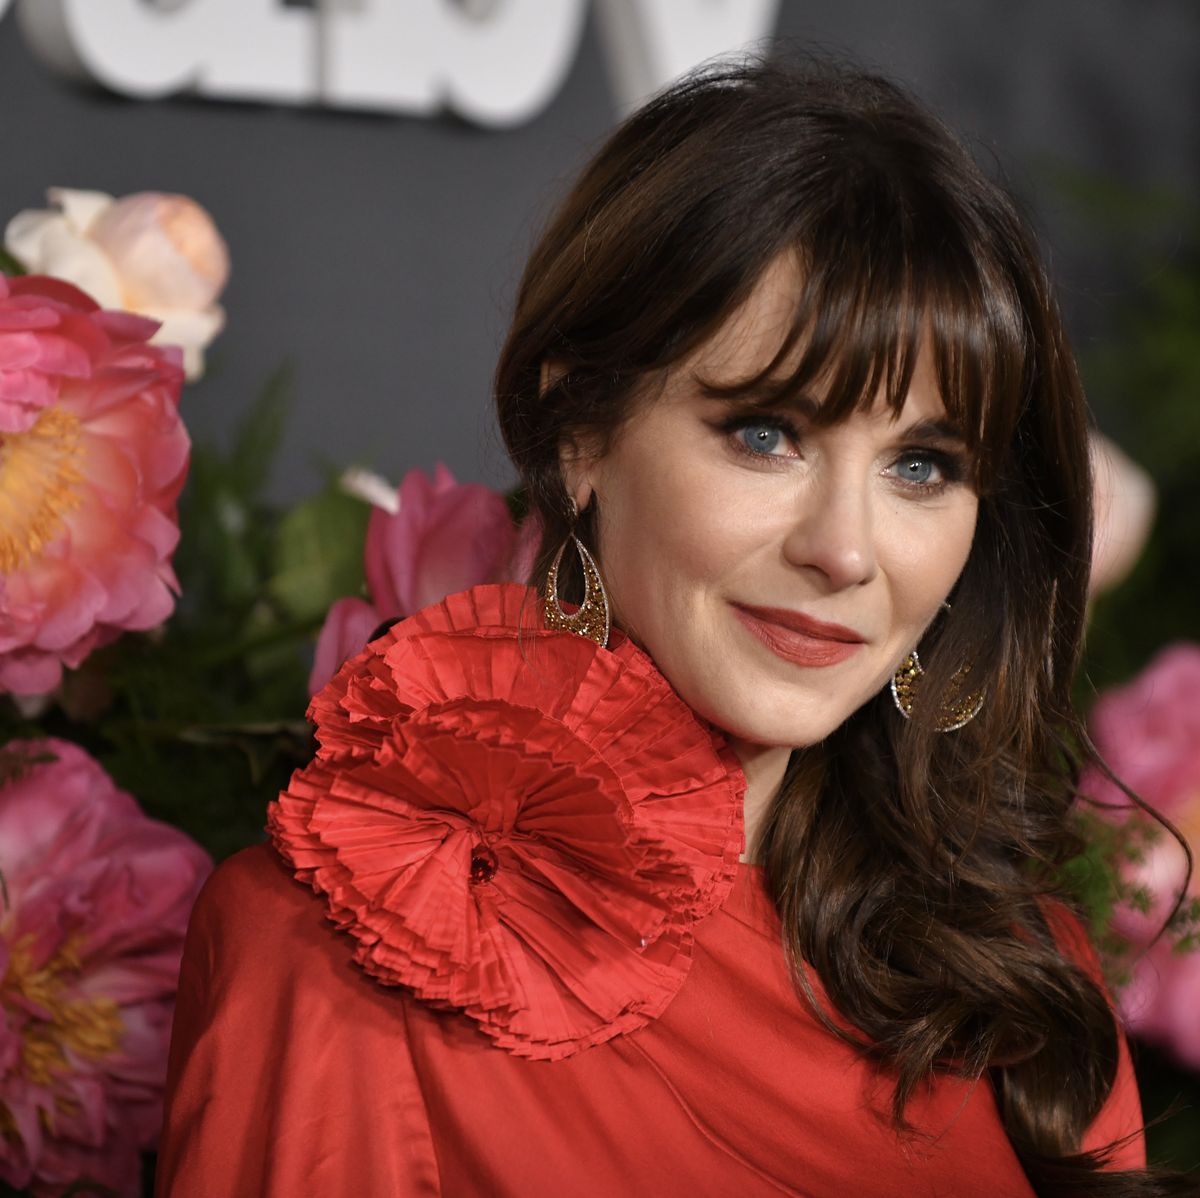 Space of the Week: Zooey Deschanel's Home Office Is a Craft